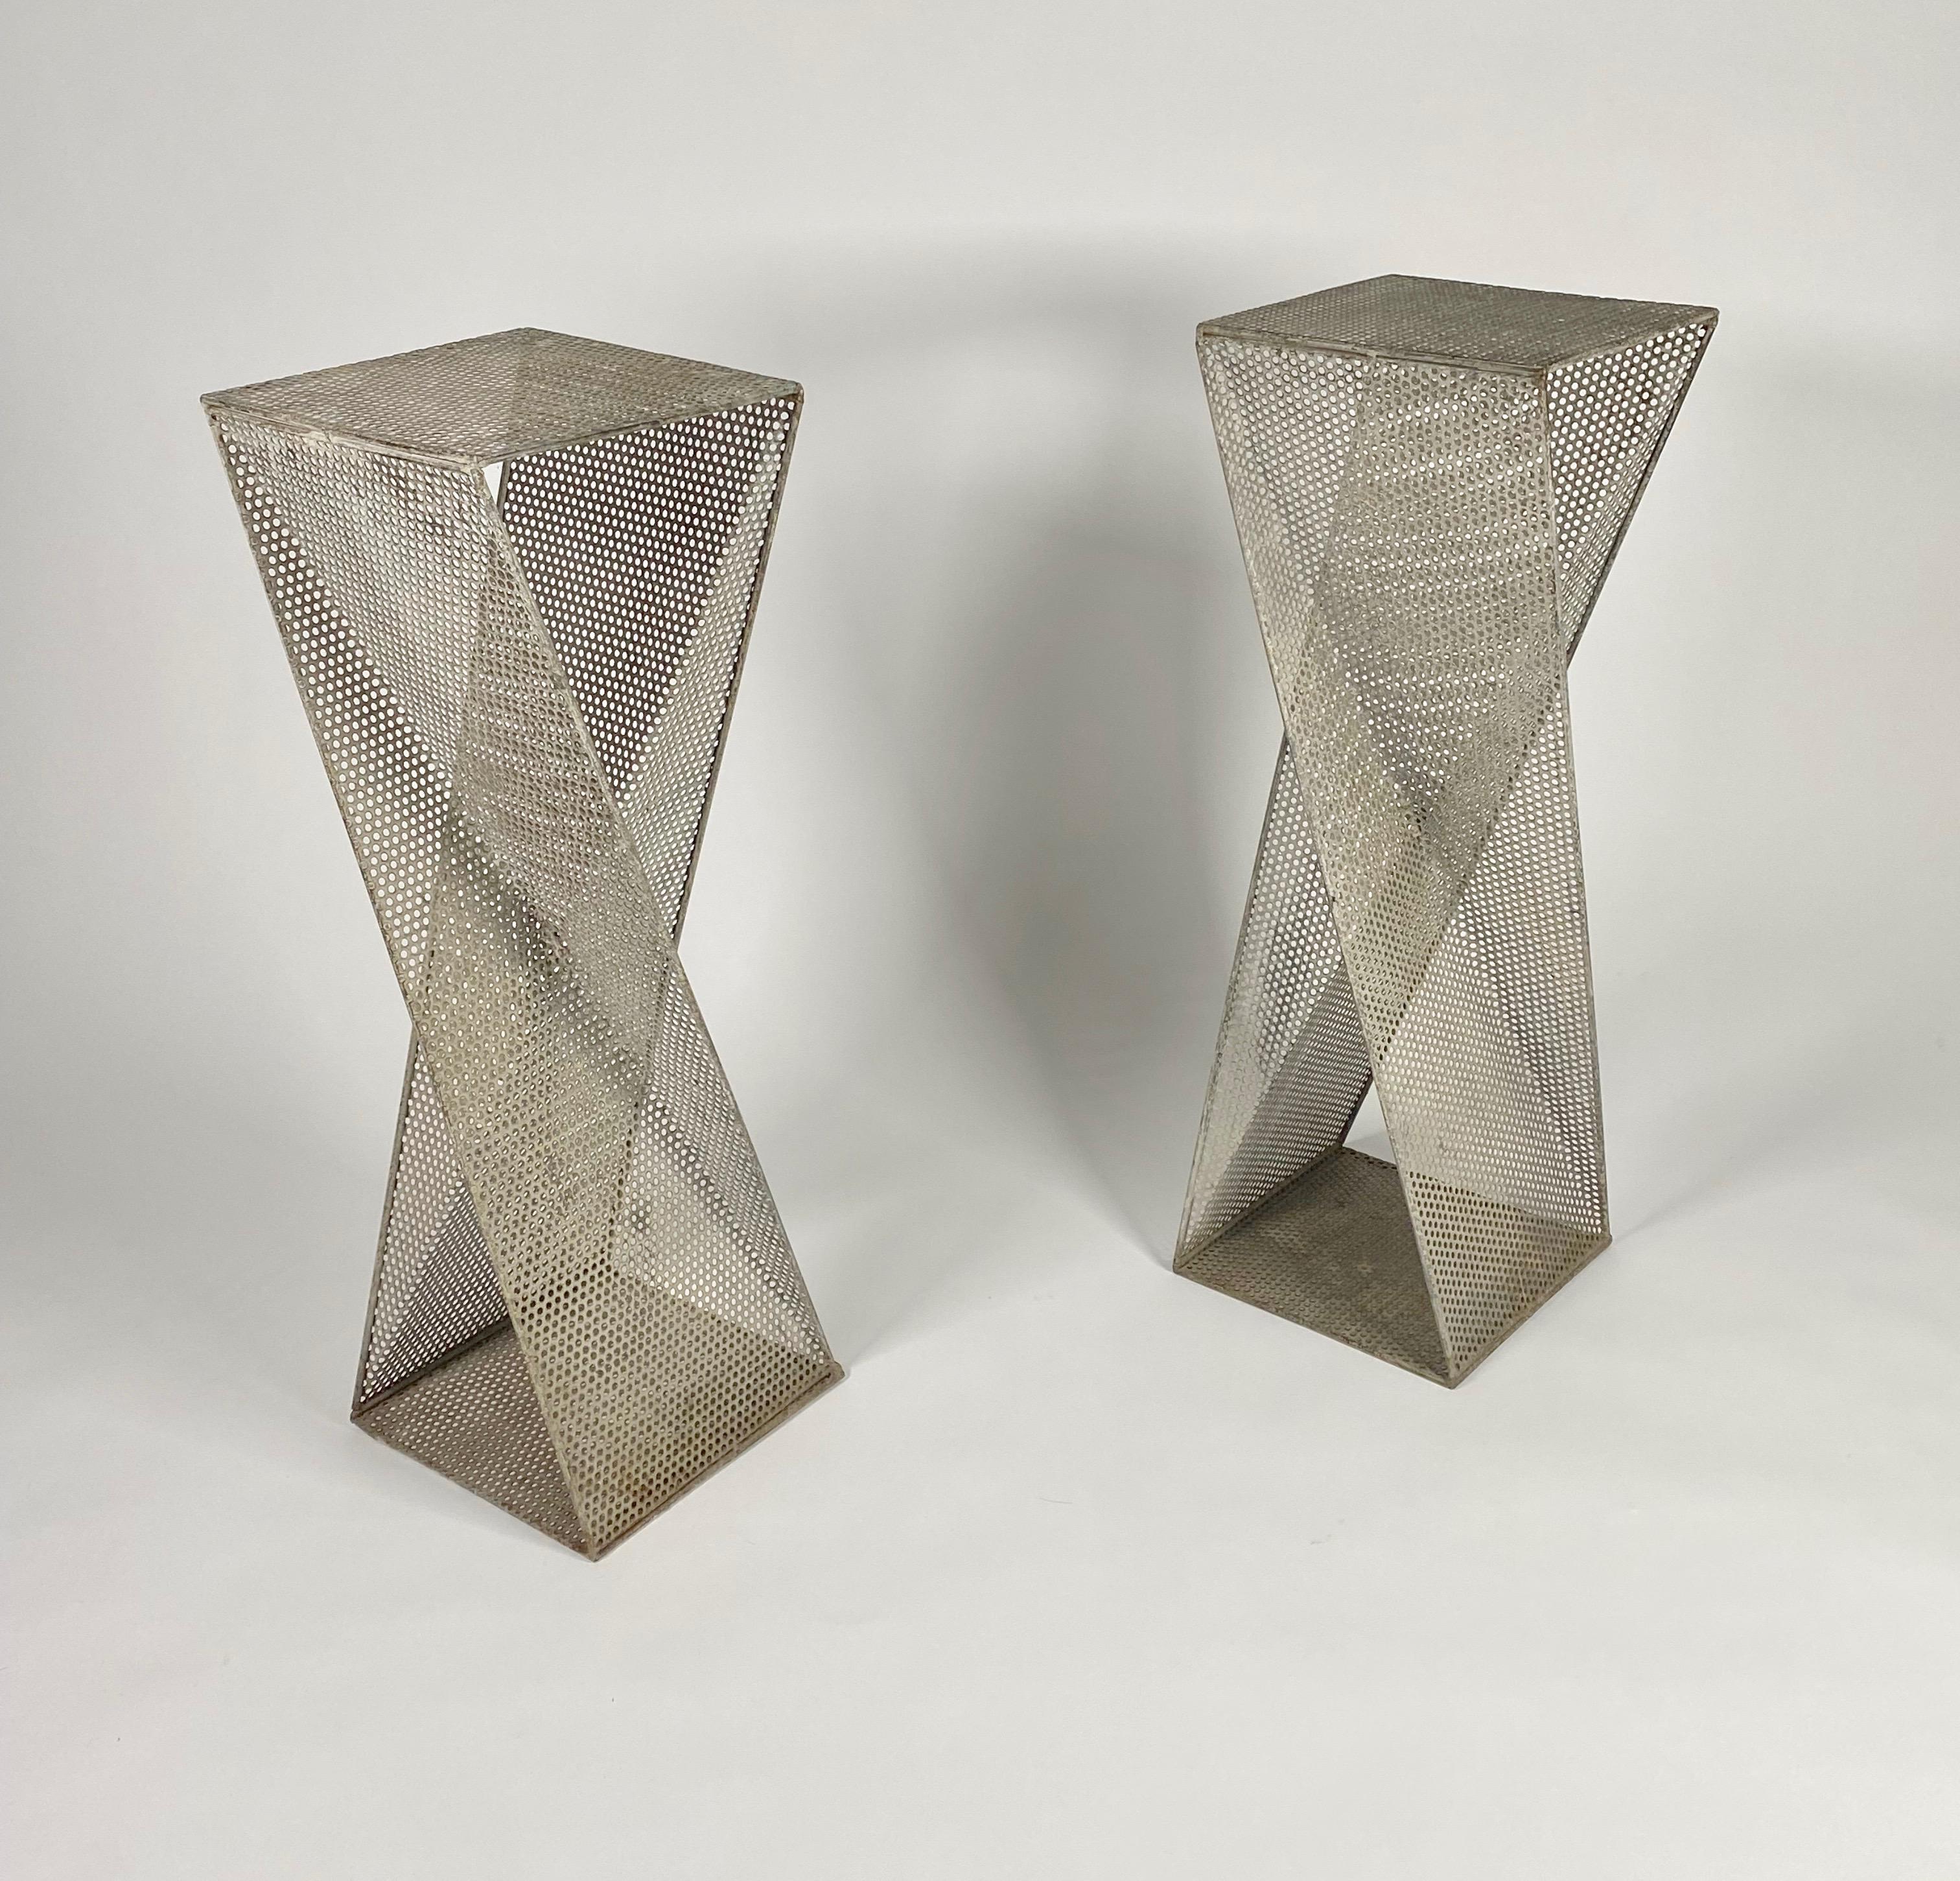 Pair of perforated metal pedestals in the style of Mathieu Mategot, designer unknown. Geometric origami folded forms with a interesting architectural design to them that creates light and shadow patterns in the surrounding environment. They have a